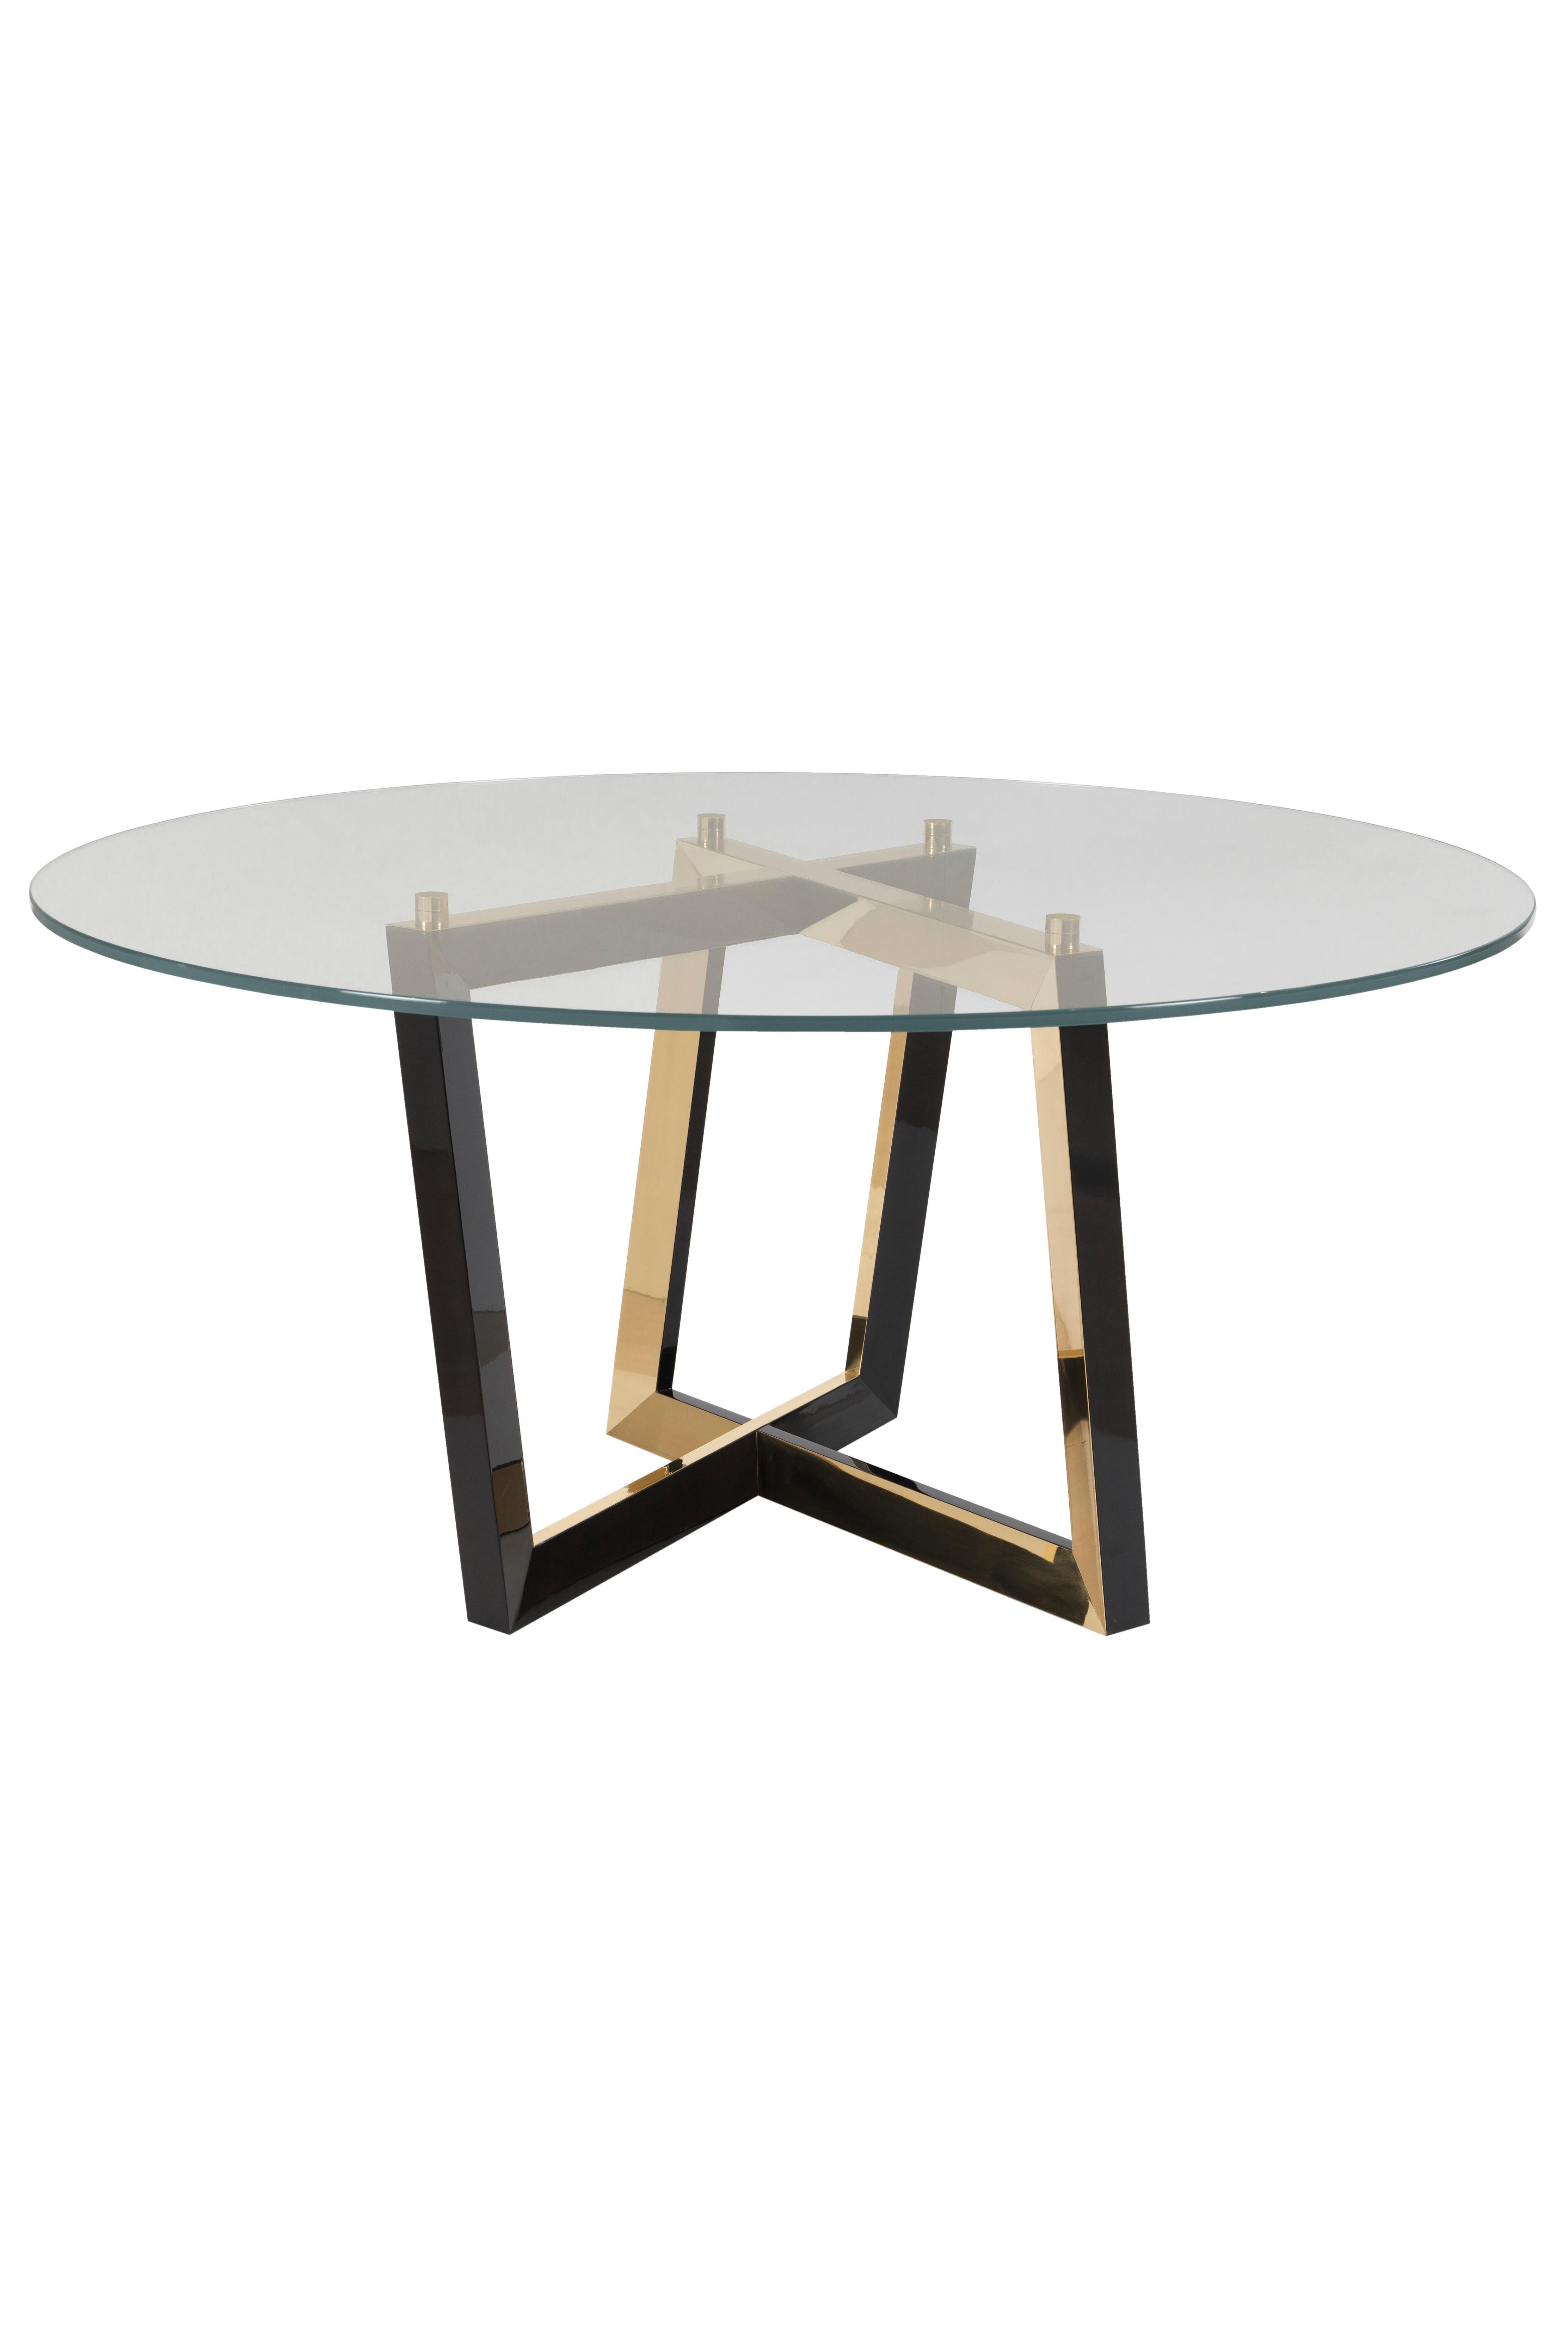 Olisippo dining table, Modern Collection, Handcrafted in Portugal - Europe by Greenapple.

The Olisippo modern console table draws inspiration from the ancient history of Lisbon, embodying its architectural essence where stone takes center stage.